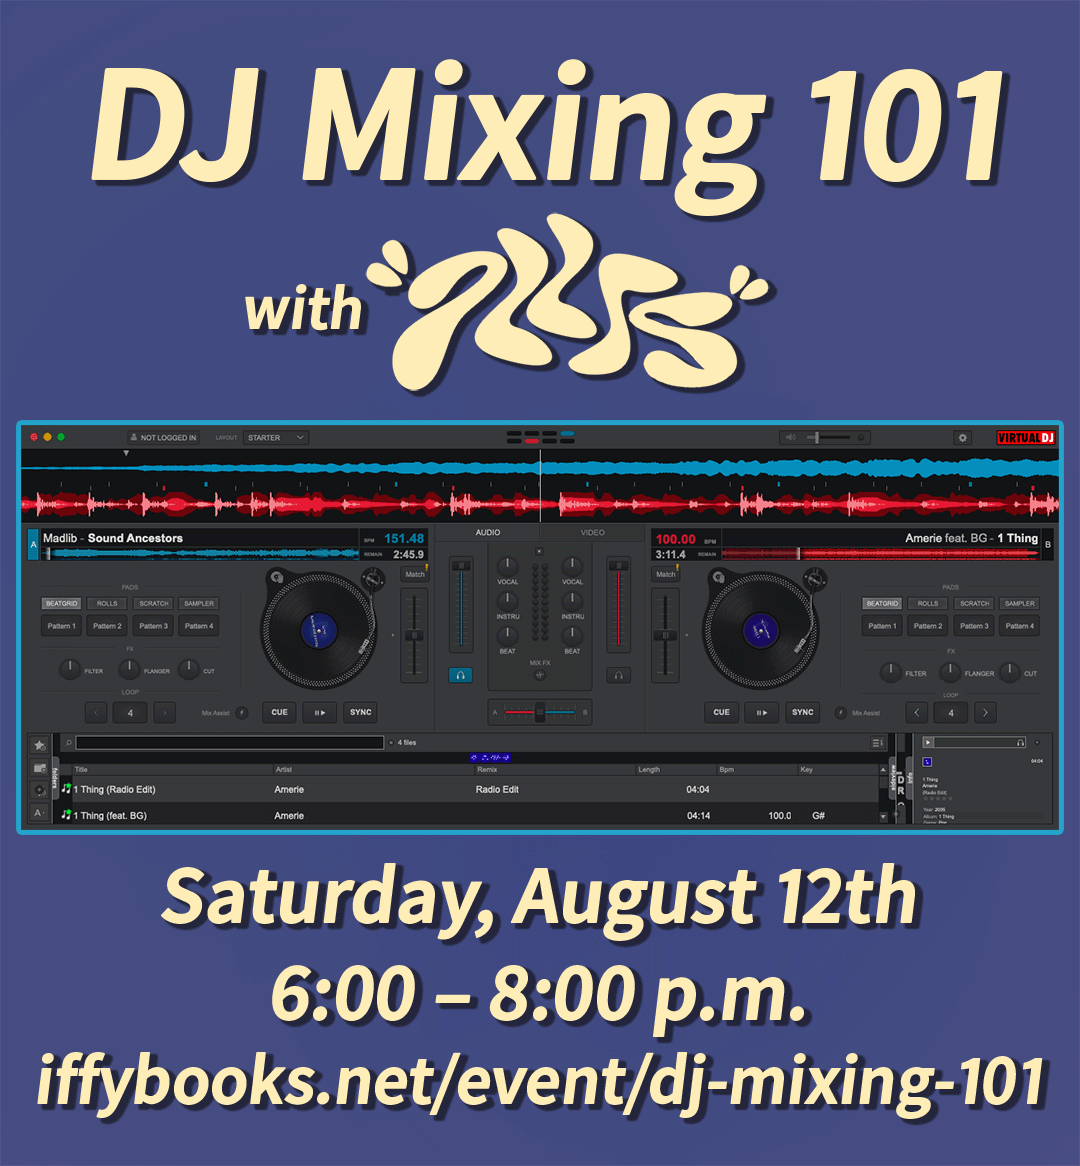 A screen capture from the program VirtualDJ with two simulated turntables, along with the following text: DJ Mixing 101 with PILLAR 5 / Saturday, August 12th / 6:00 – 8:00 p.m. / iffybooks.net/event/dj-mixing-101